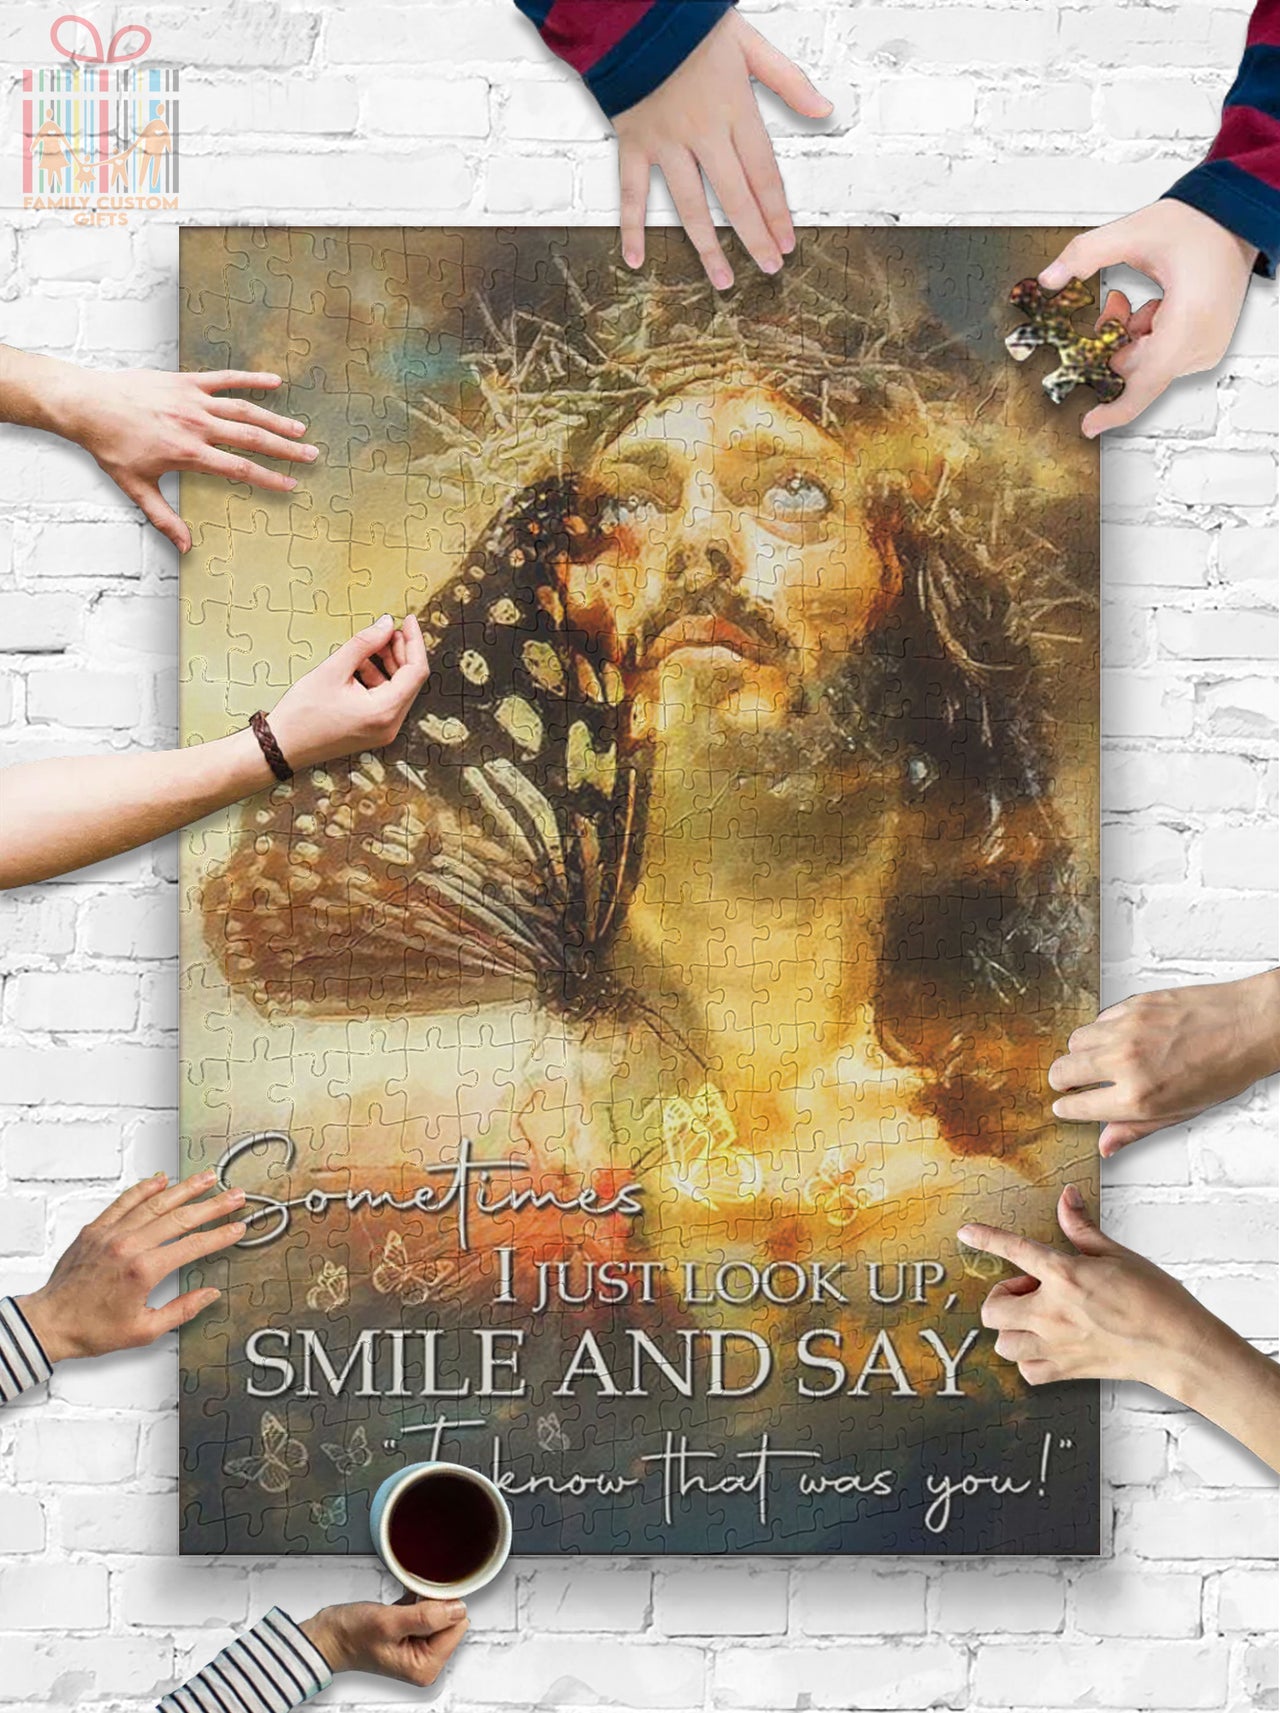 Custom Jigsaw Puzzle for Kids Adults Jesus Christ I Know That Was You God! Thank You! Personalized Puzzle